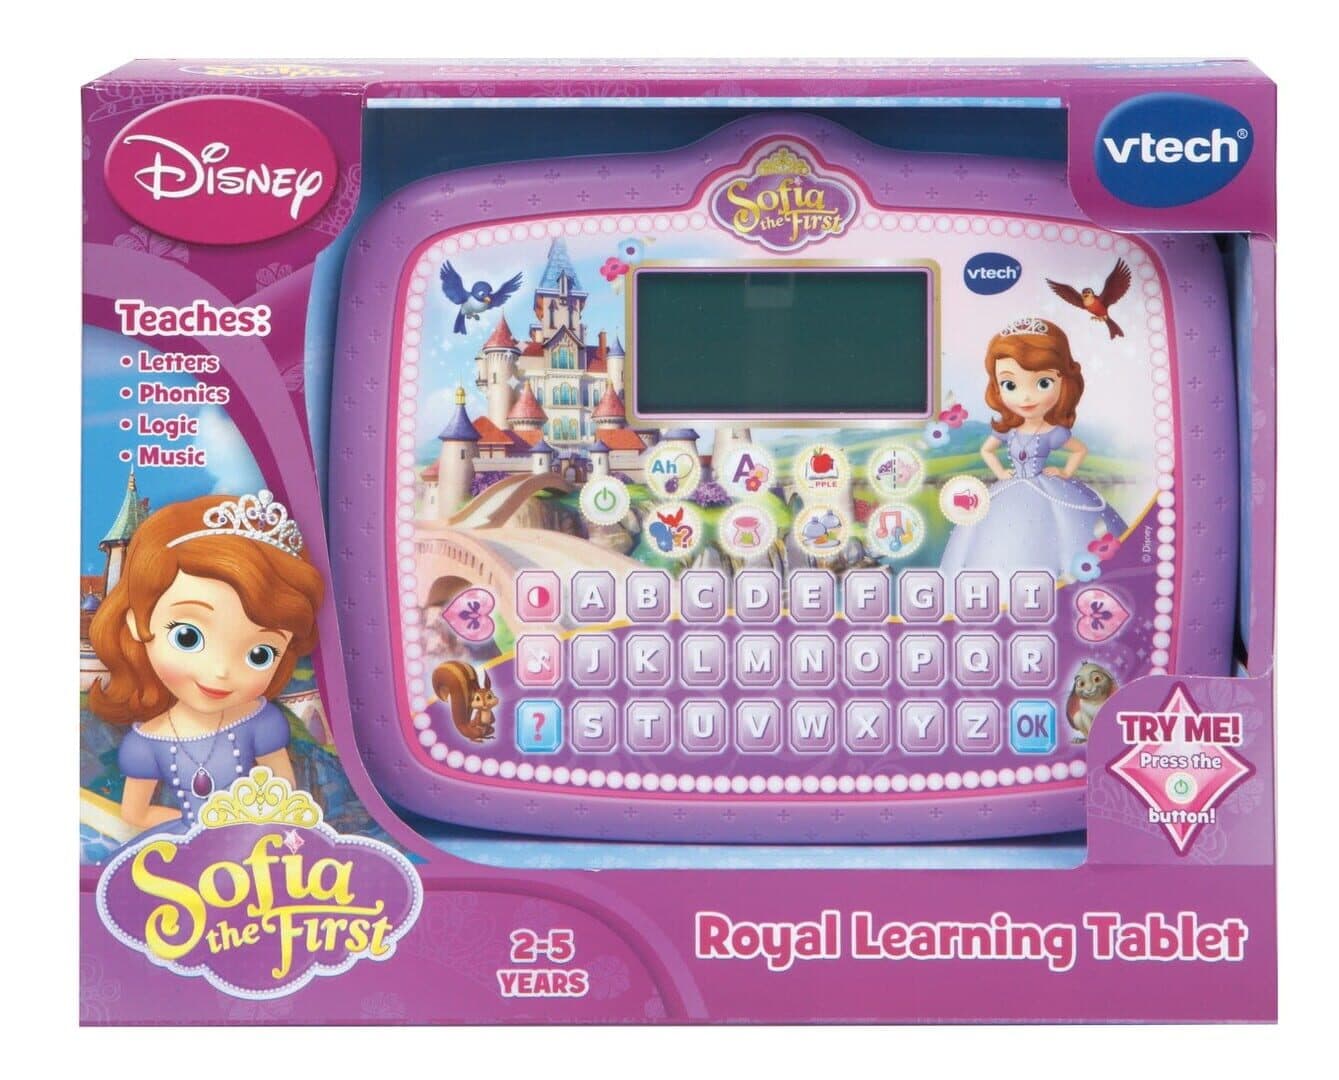 Sofia the First Royal Learning Tablet cover art